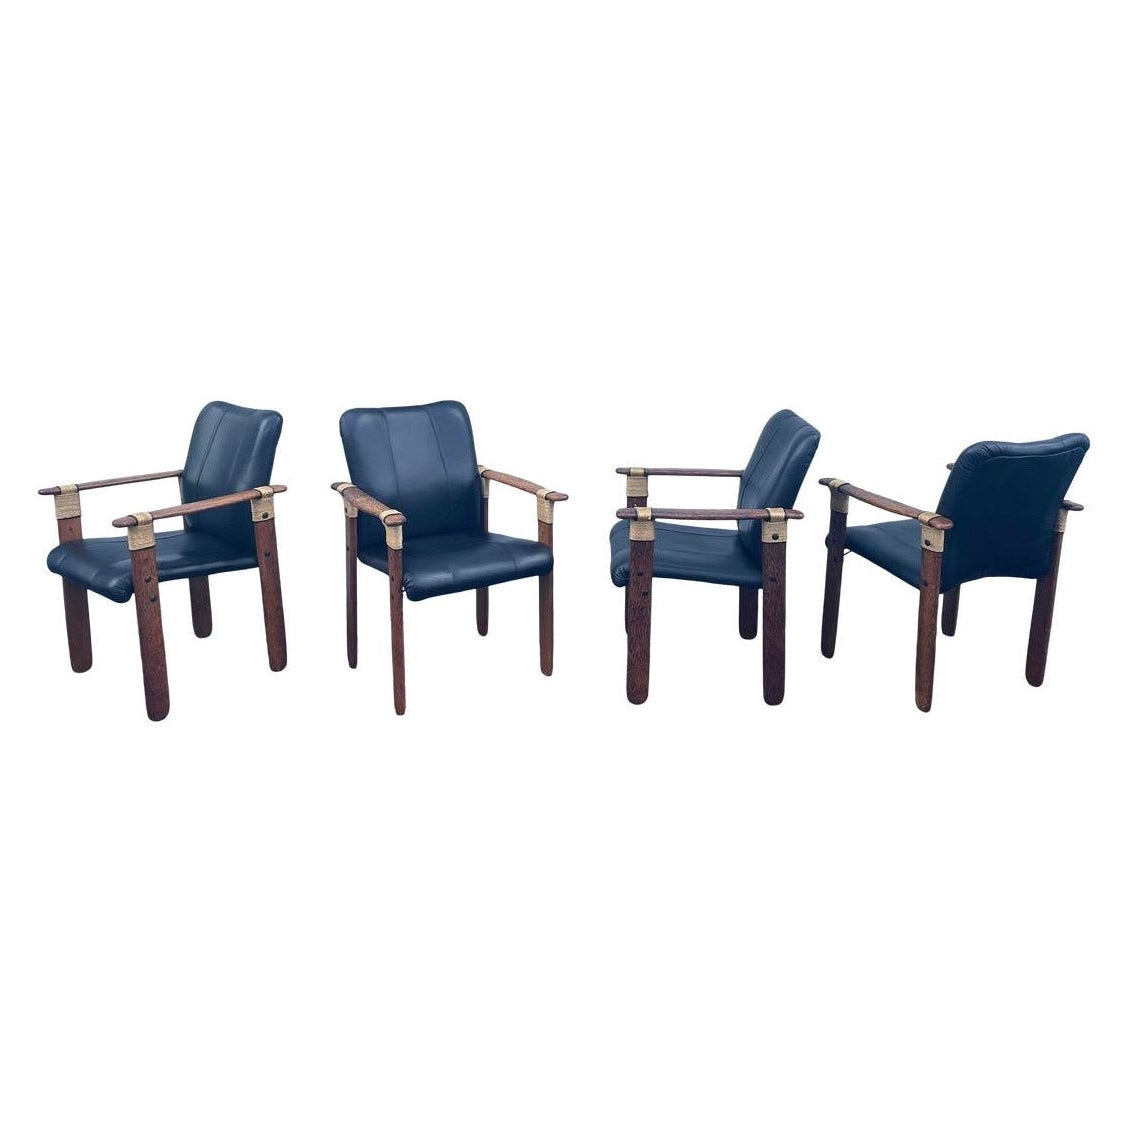 Pacific Green Palmwood and Leather "Messina" Chairs - Set of 4 For Sale